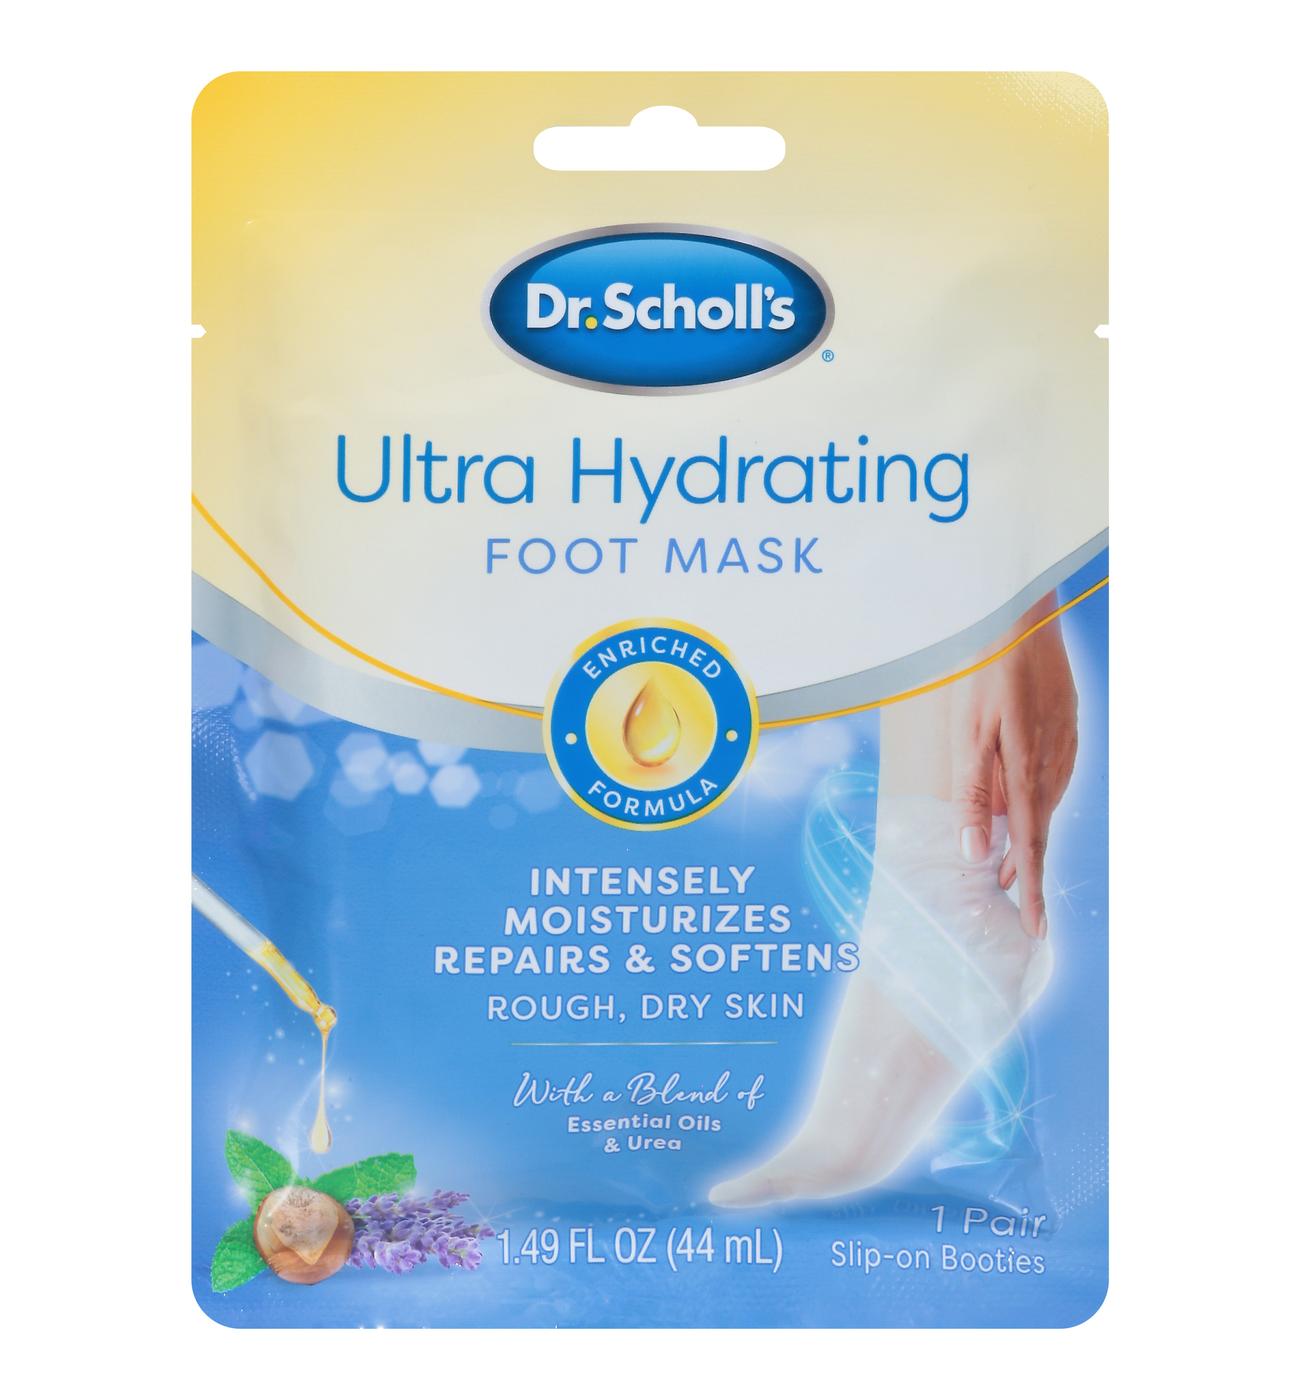 Dr. Scholl's Ultra Hydrating Foot Mask; image 1 of 2